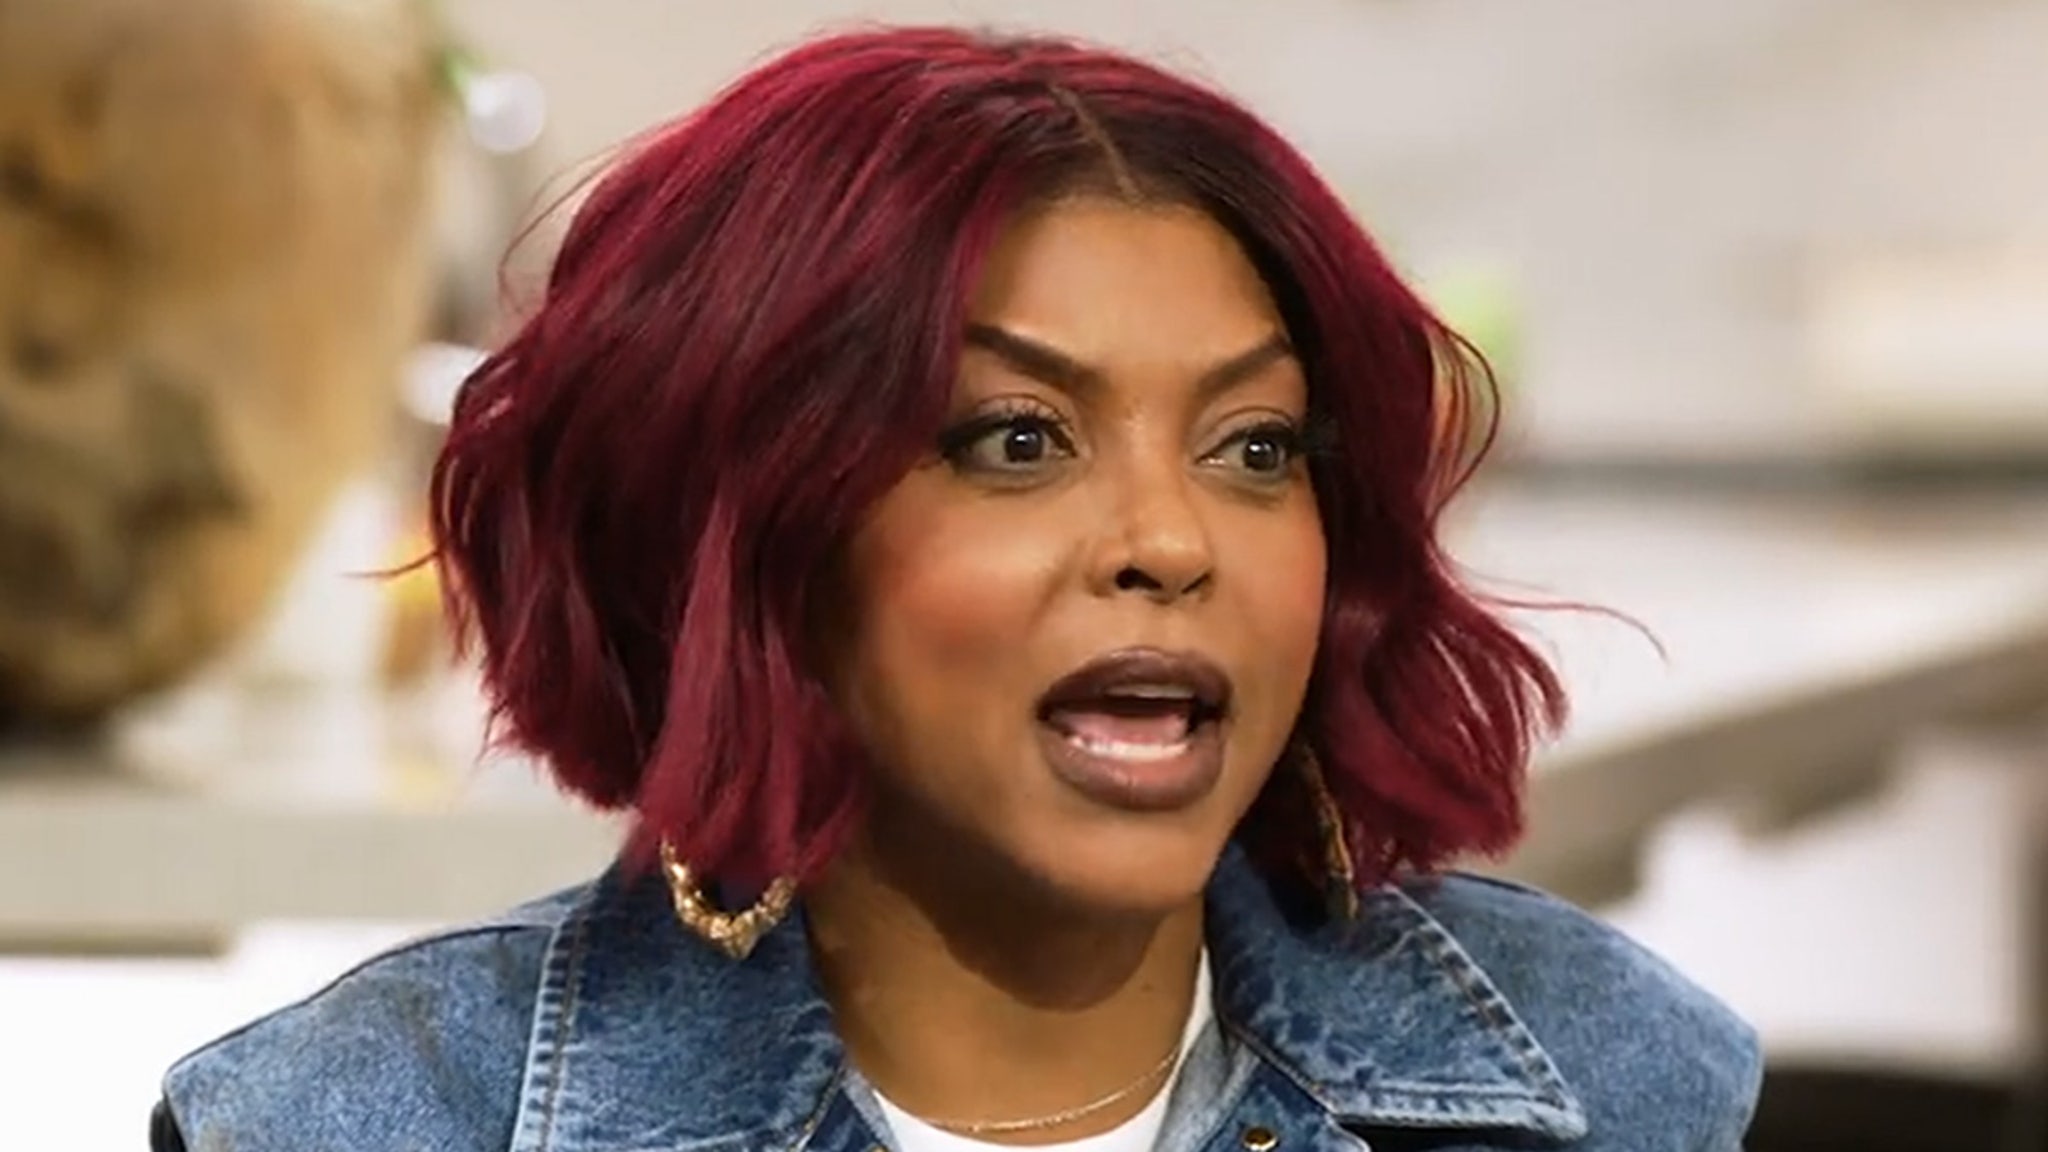 Taraji P. Henson contemplated suicide during the COVID pandemic